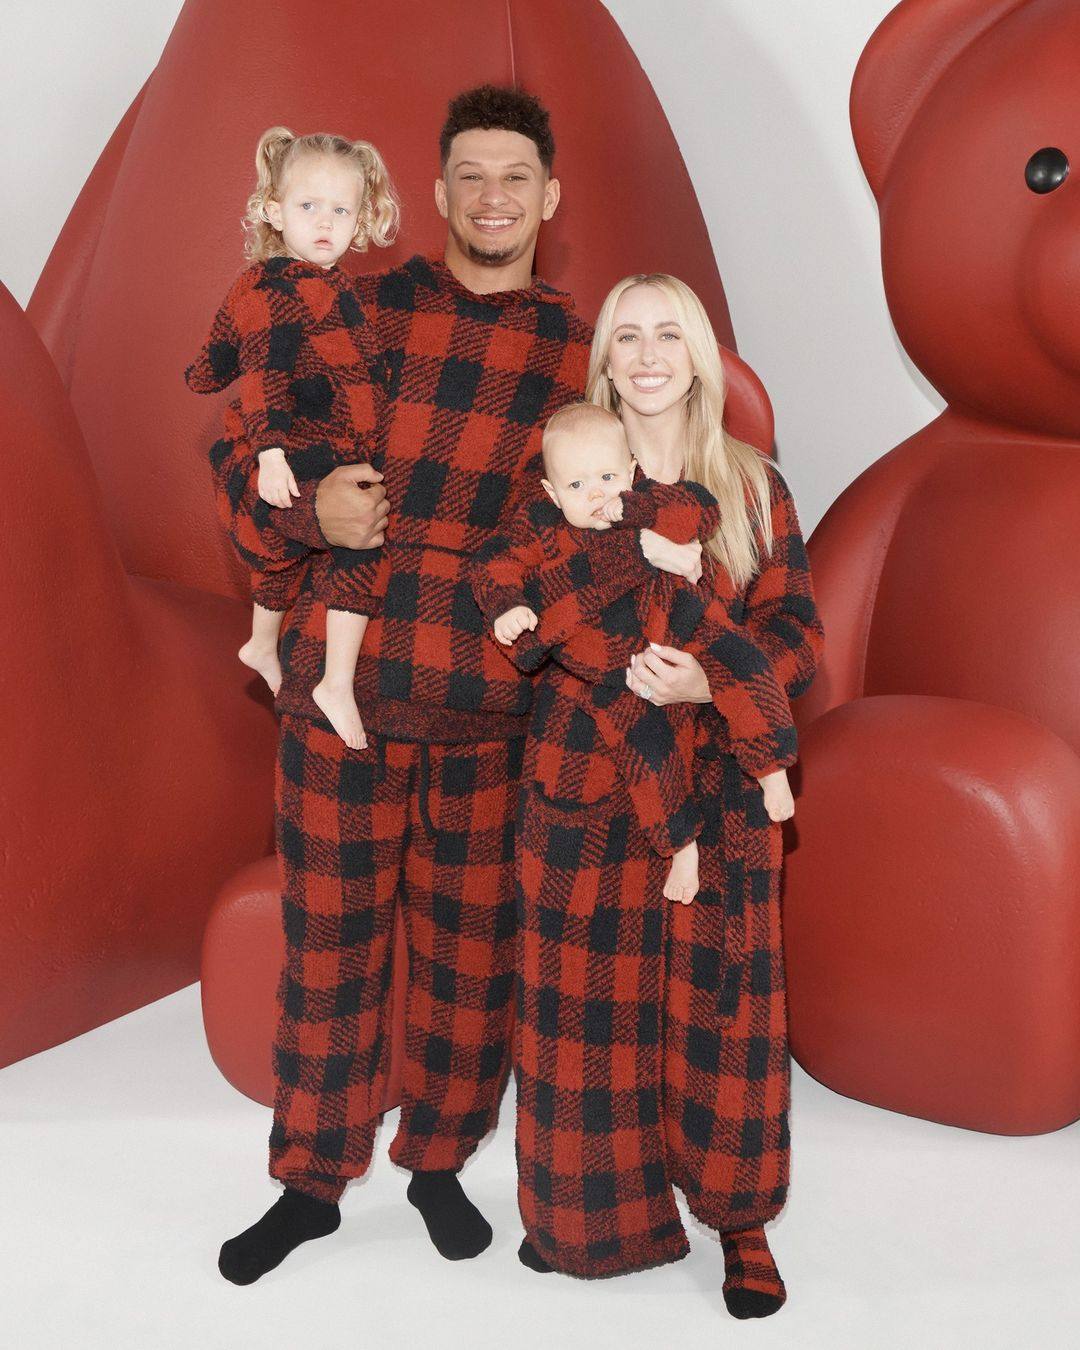 NFL star Patrick Mahome, his wife Brittany and their kids Sterling Skye and Patrick “Bronze” just starred in a Skims campaign that quickly went viral online. Photo: @skims/Instagram